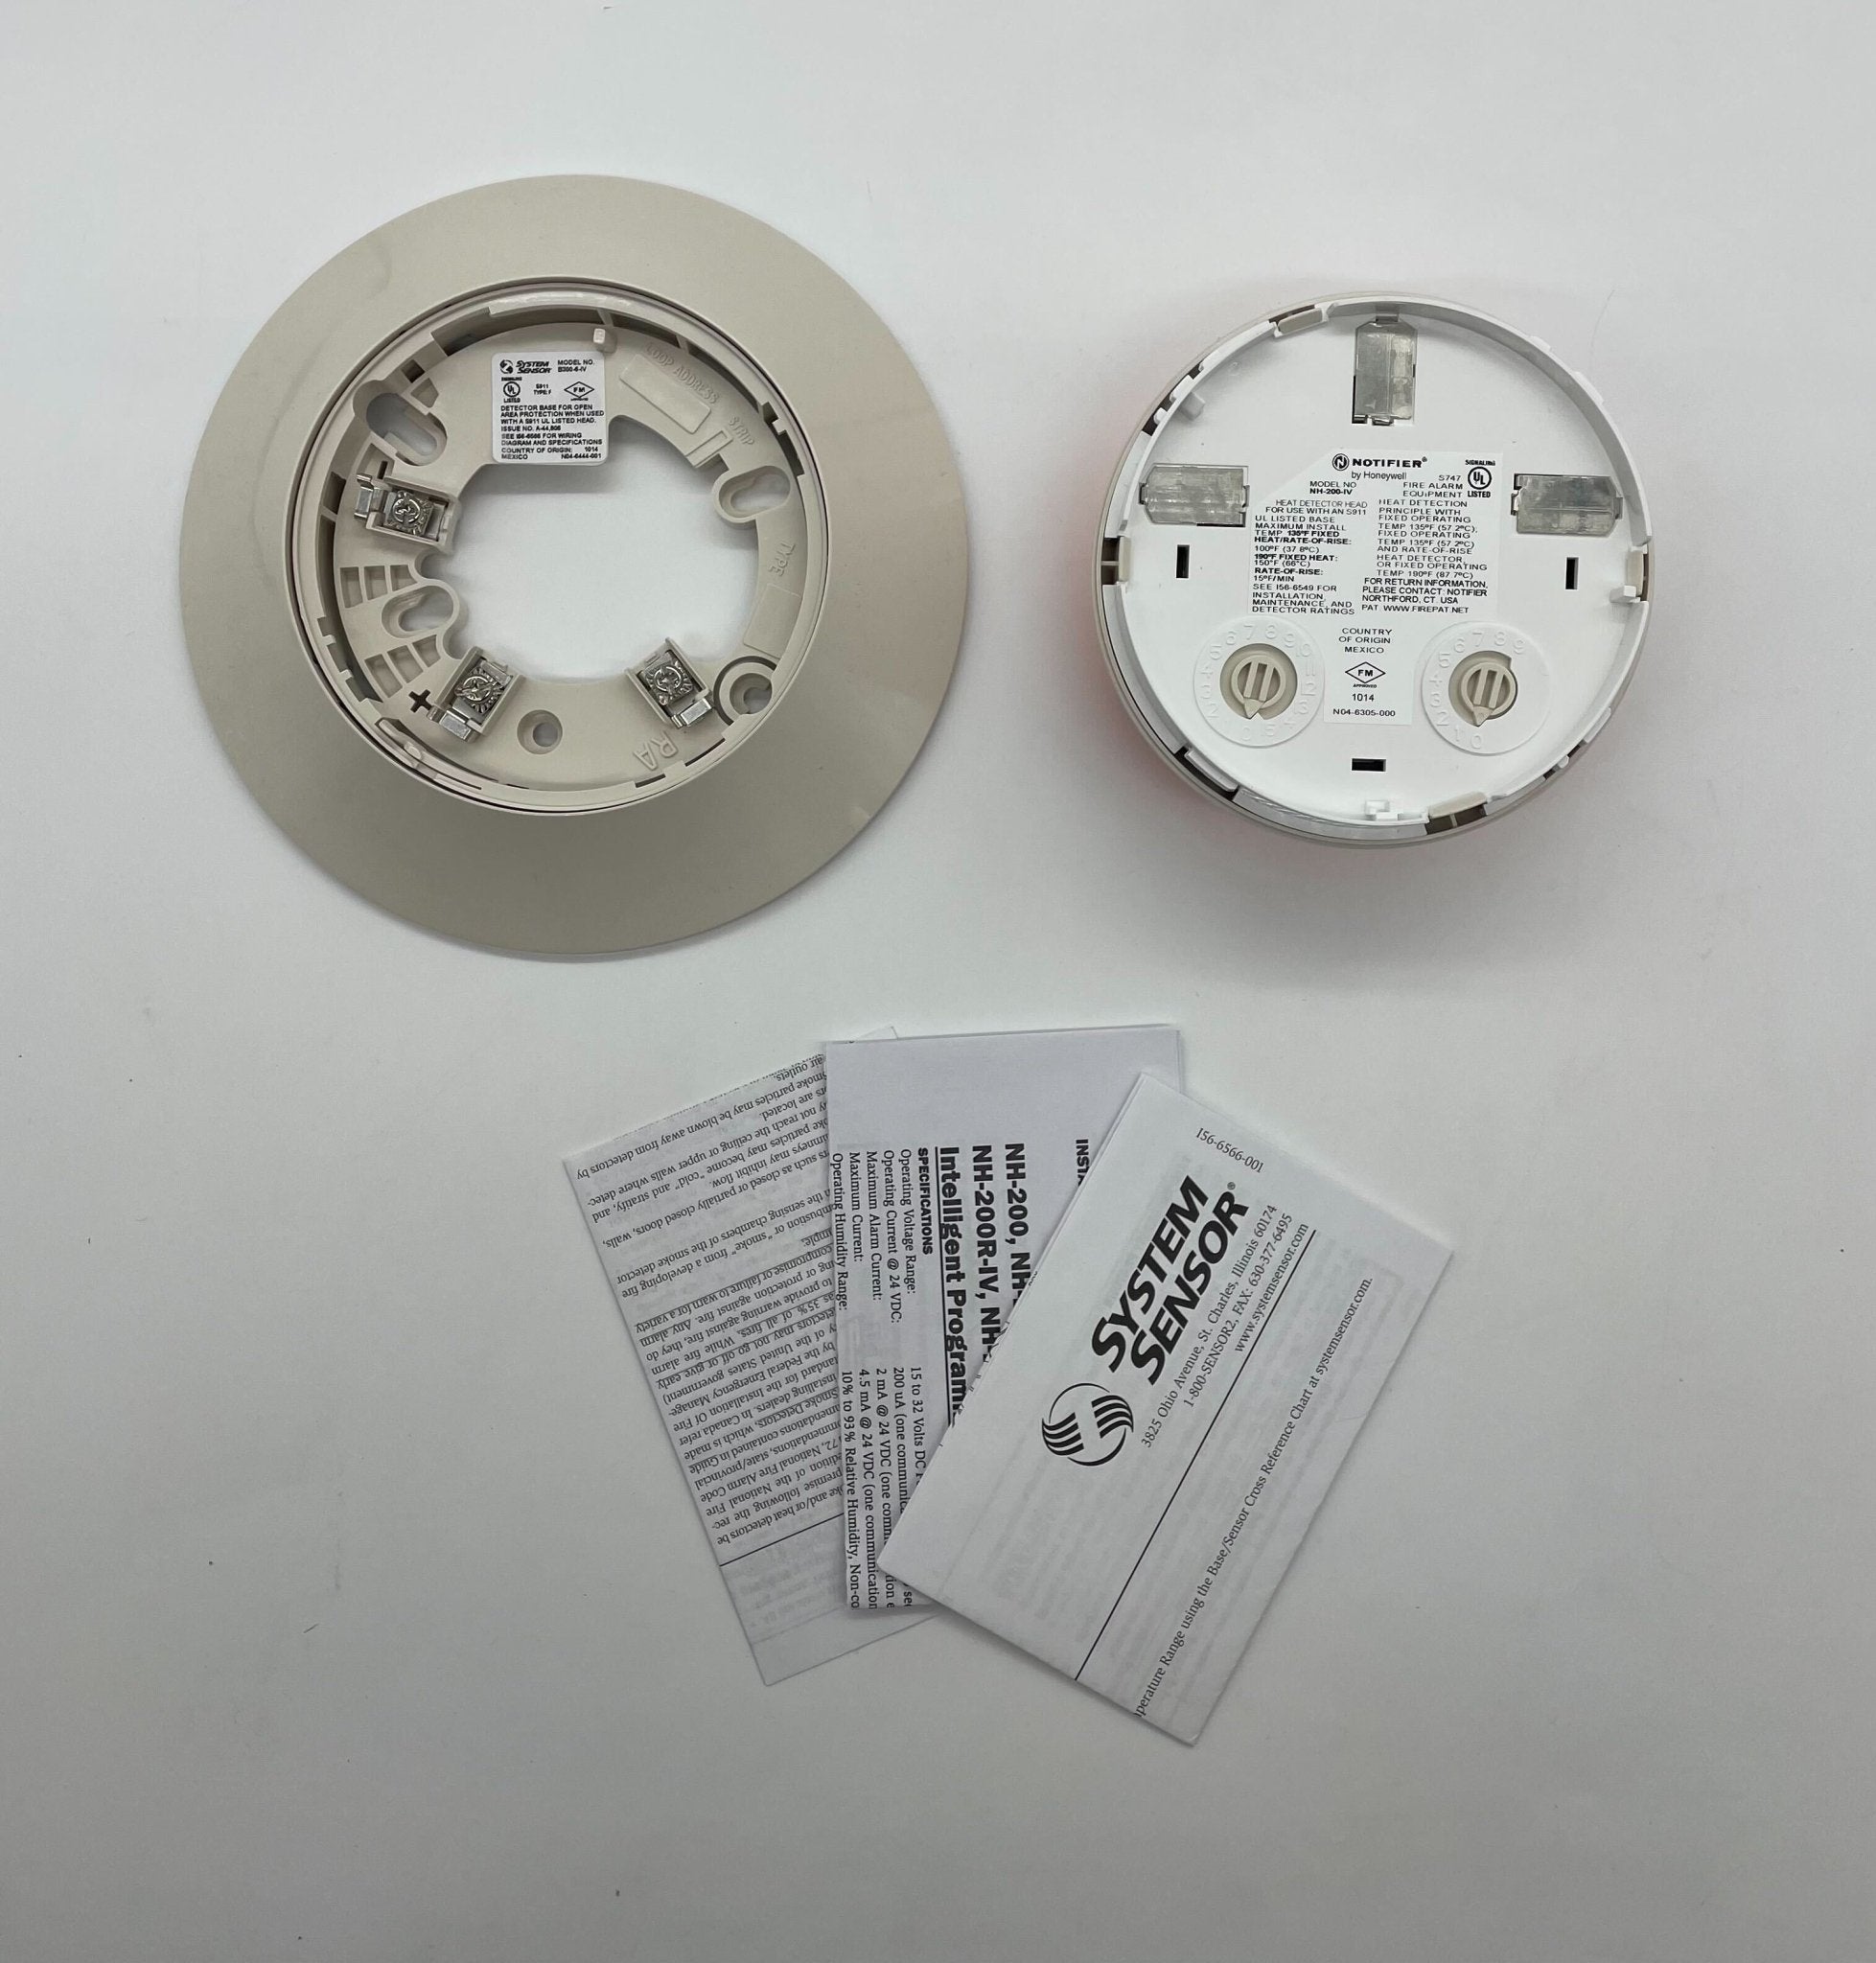 Notifier NH-200-IV - The Fire Alarm Supplier